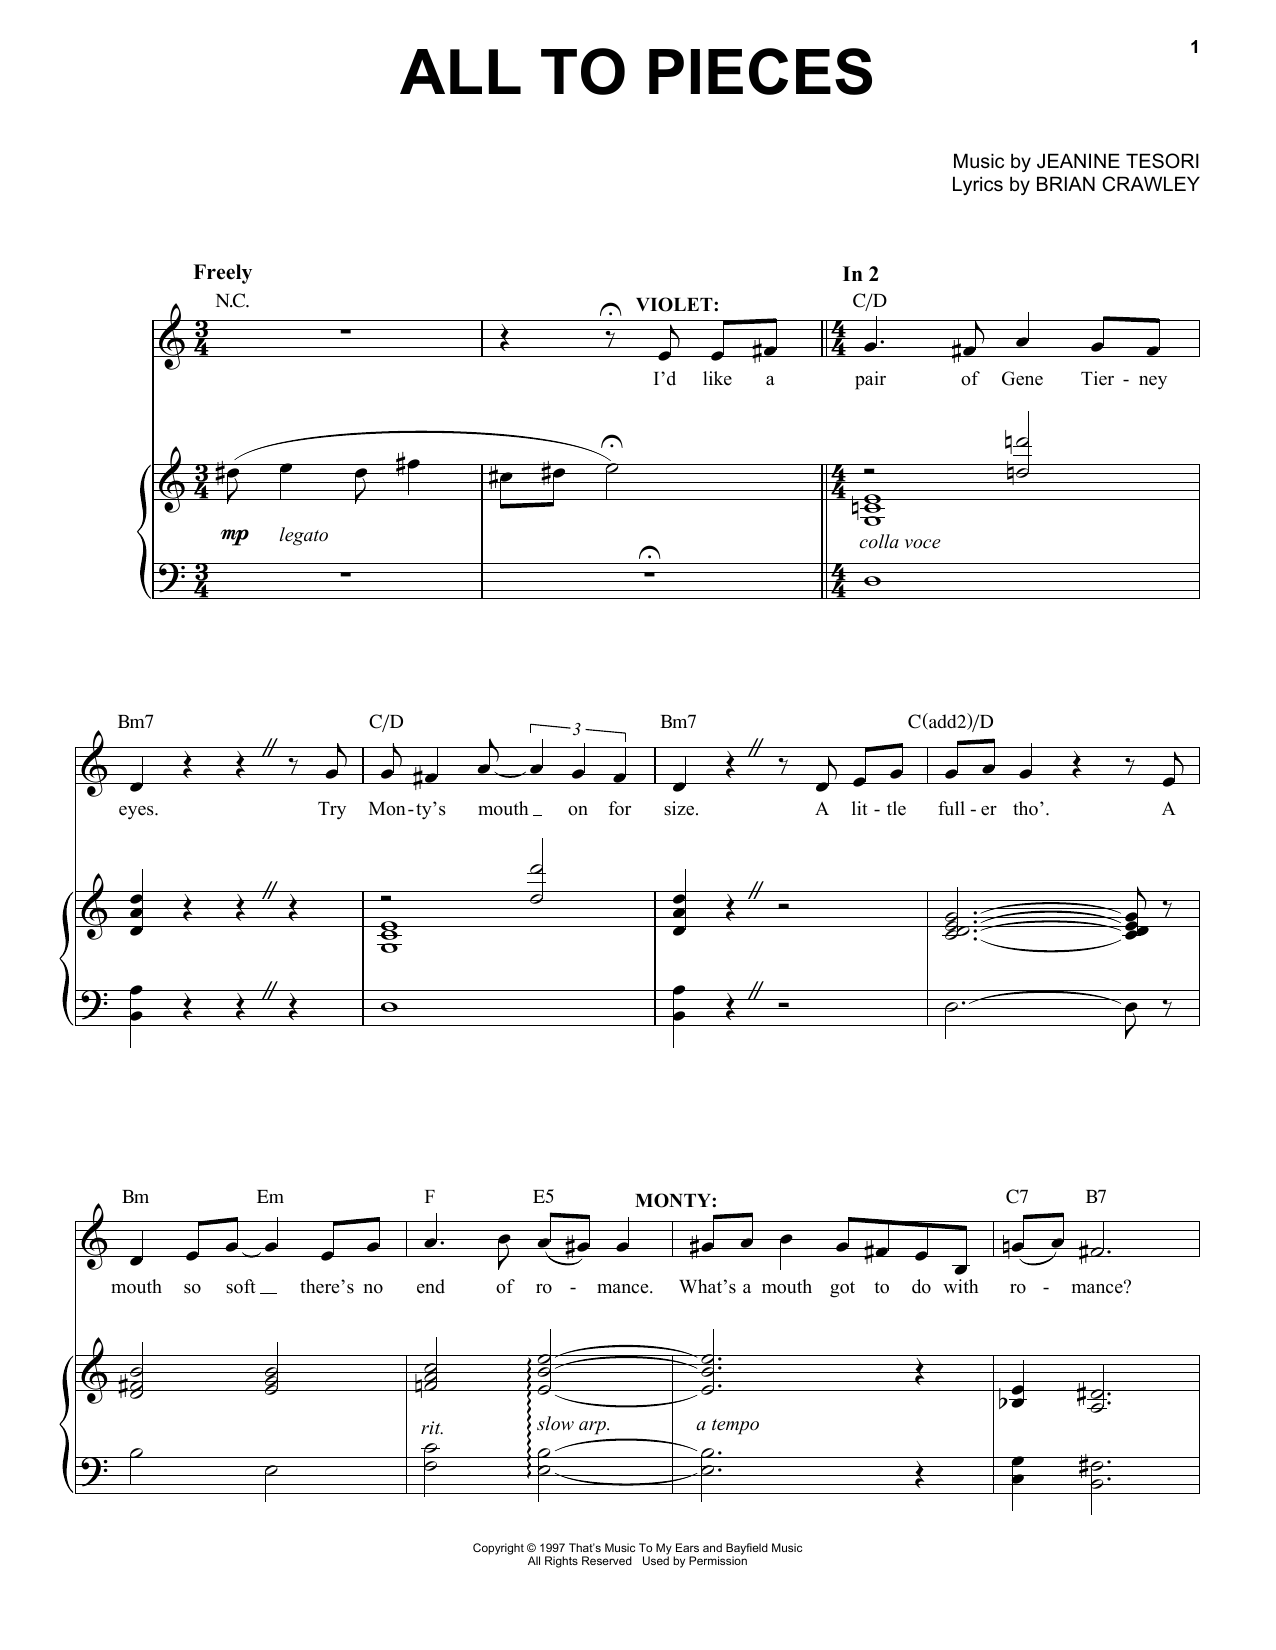 Download Jeanine Tesori All To Pieces Sheet Music